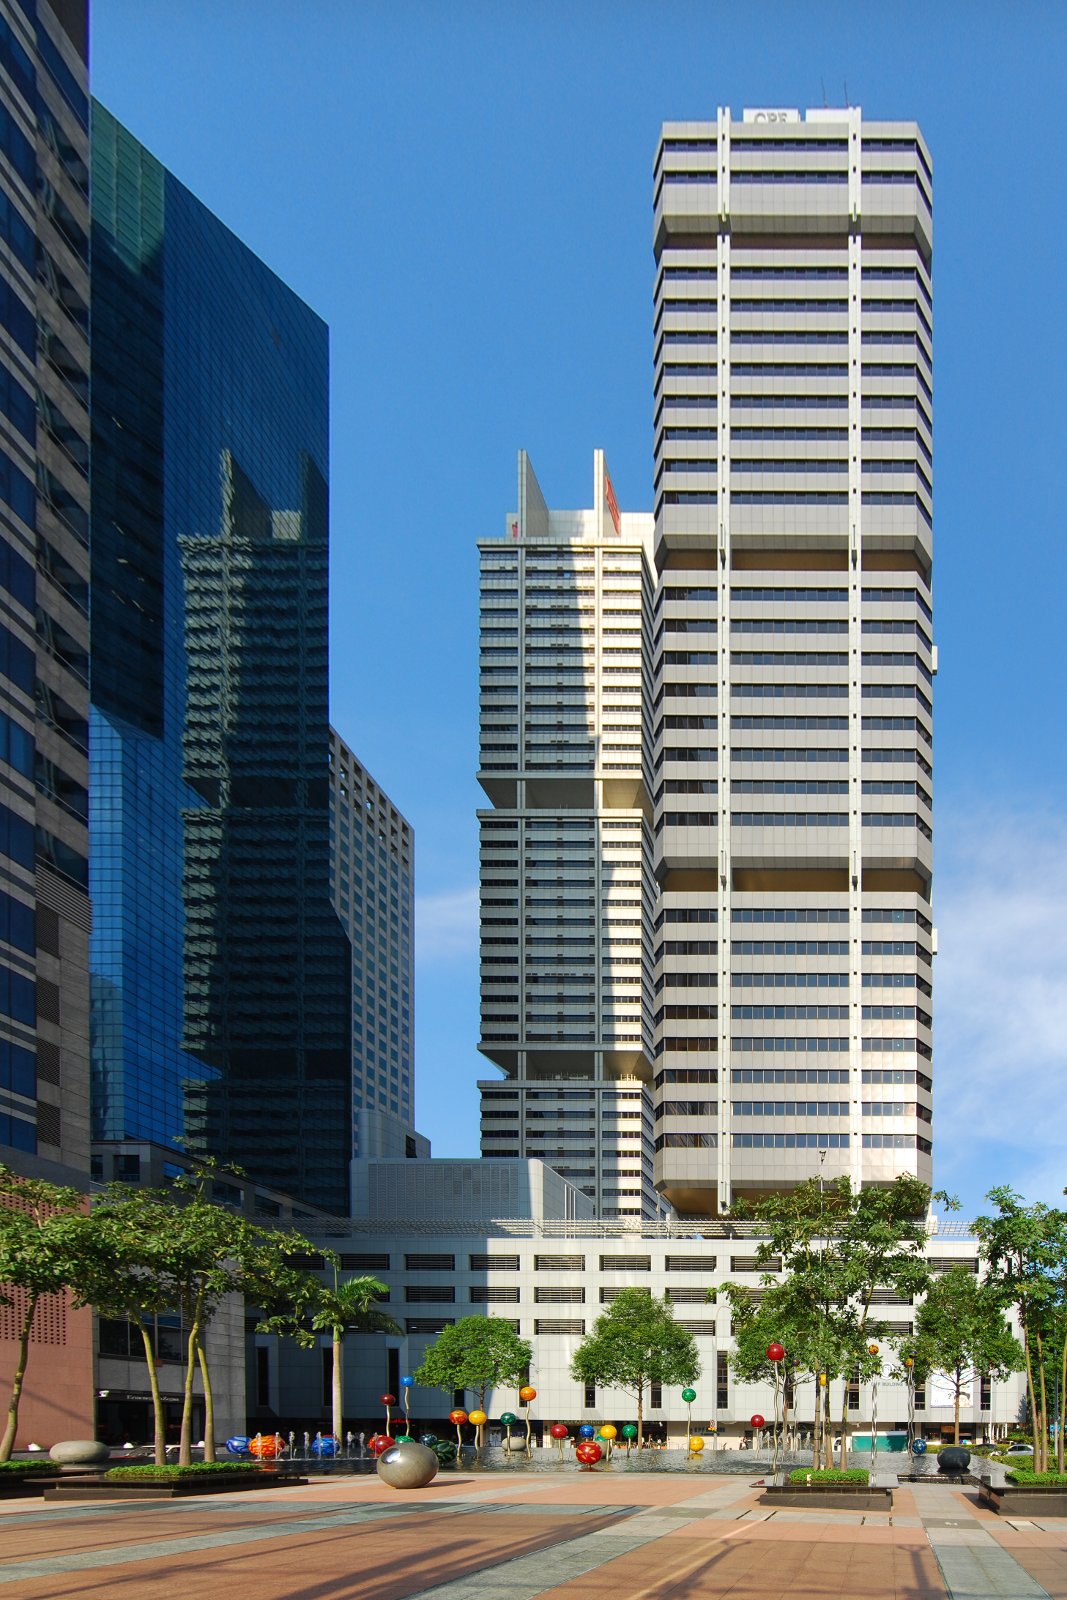 
The 29-storey CPF Building was completed in 1976.